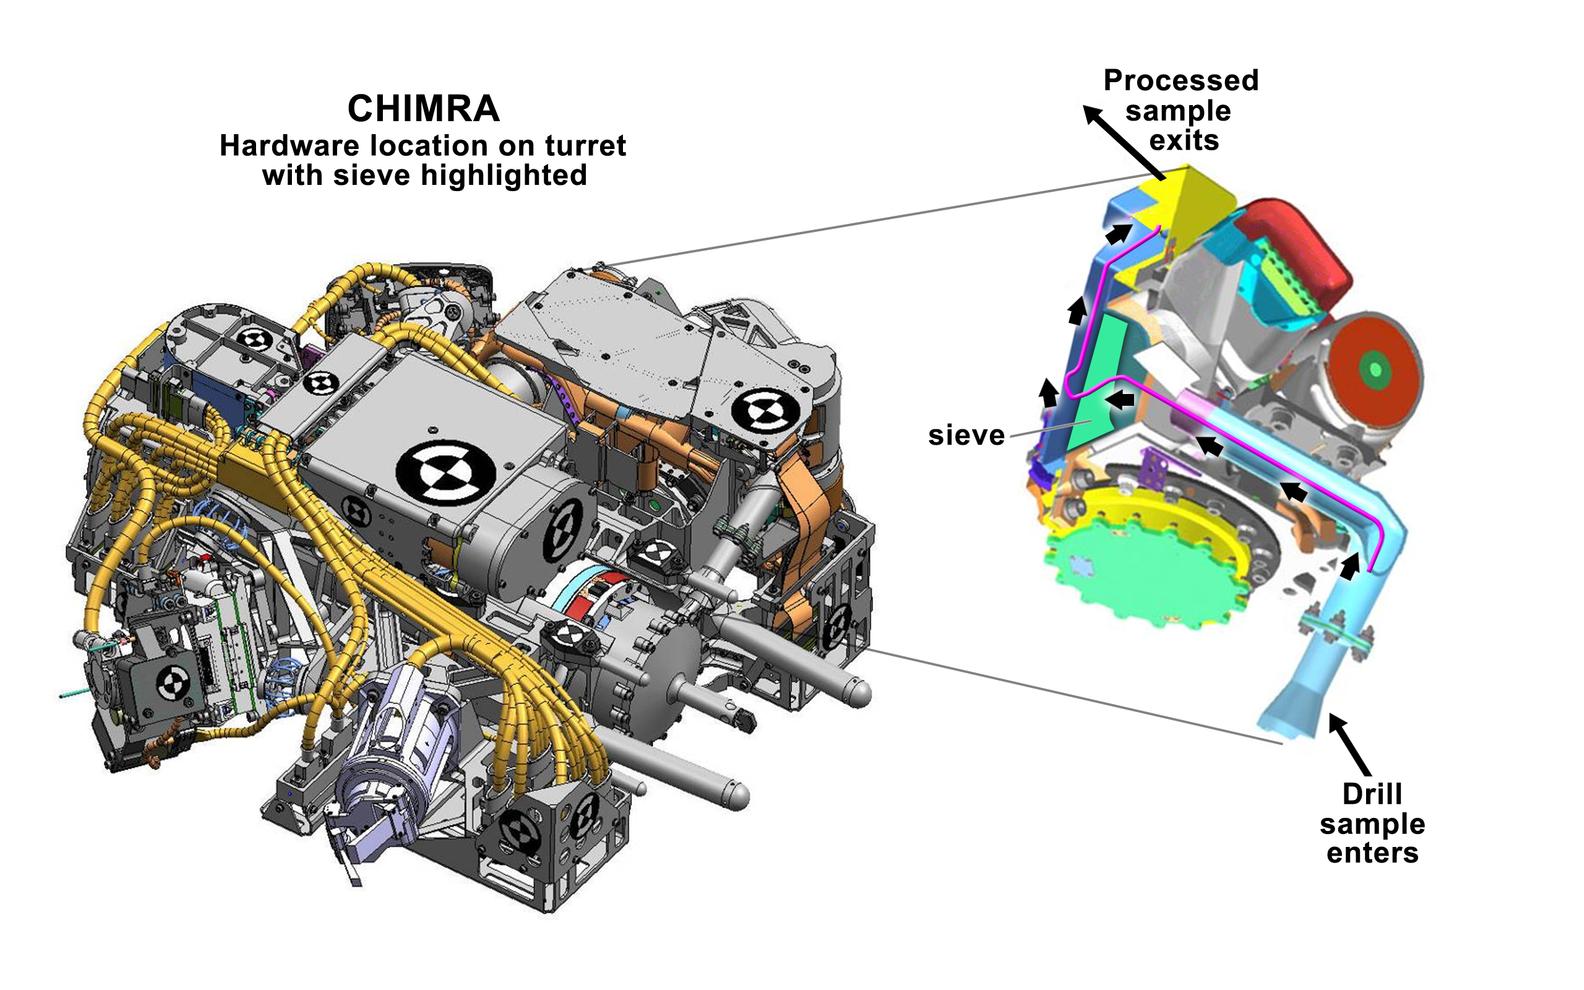 This figure shows the location of CHIMRA on the turret of NASA's Curiosity rover, together with a cutaway view of the device.